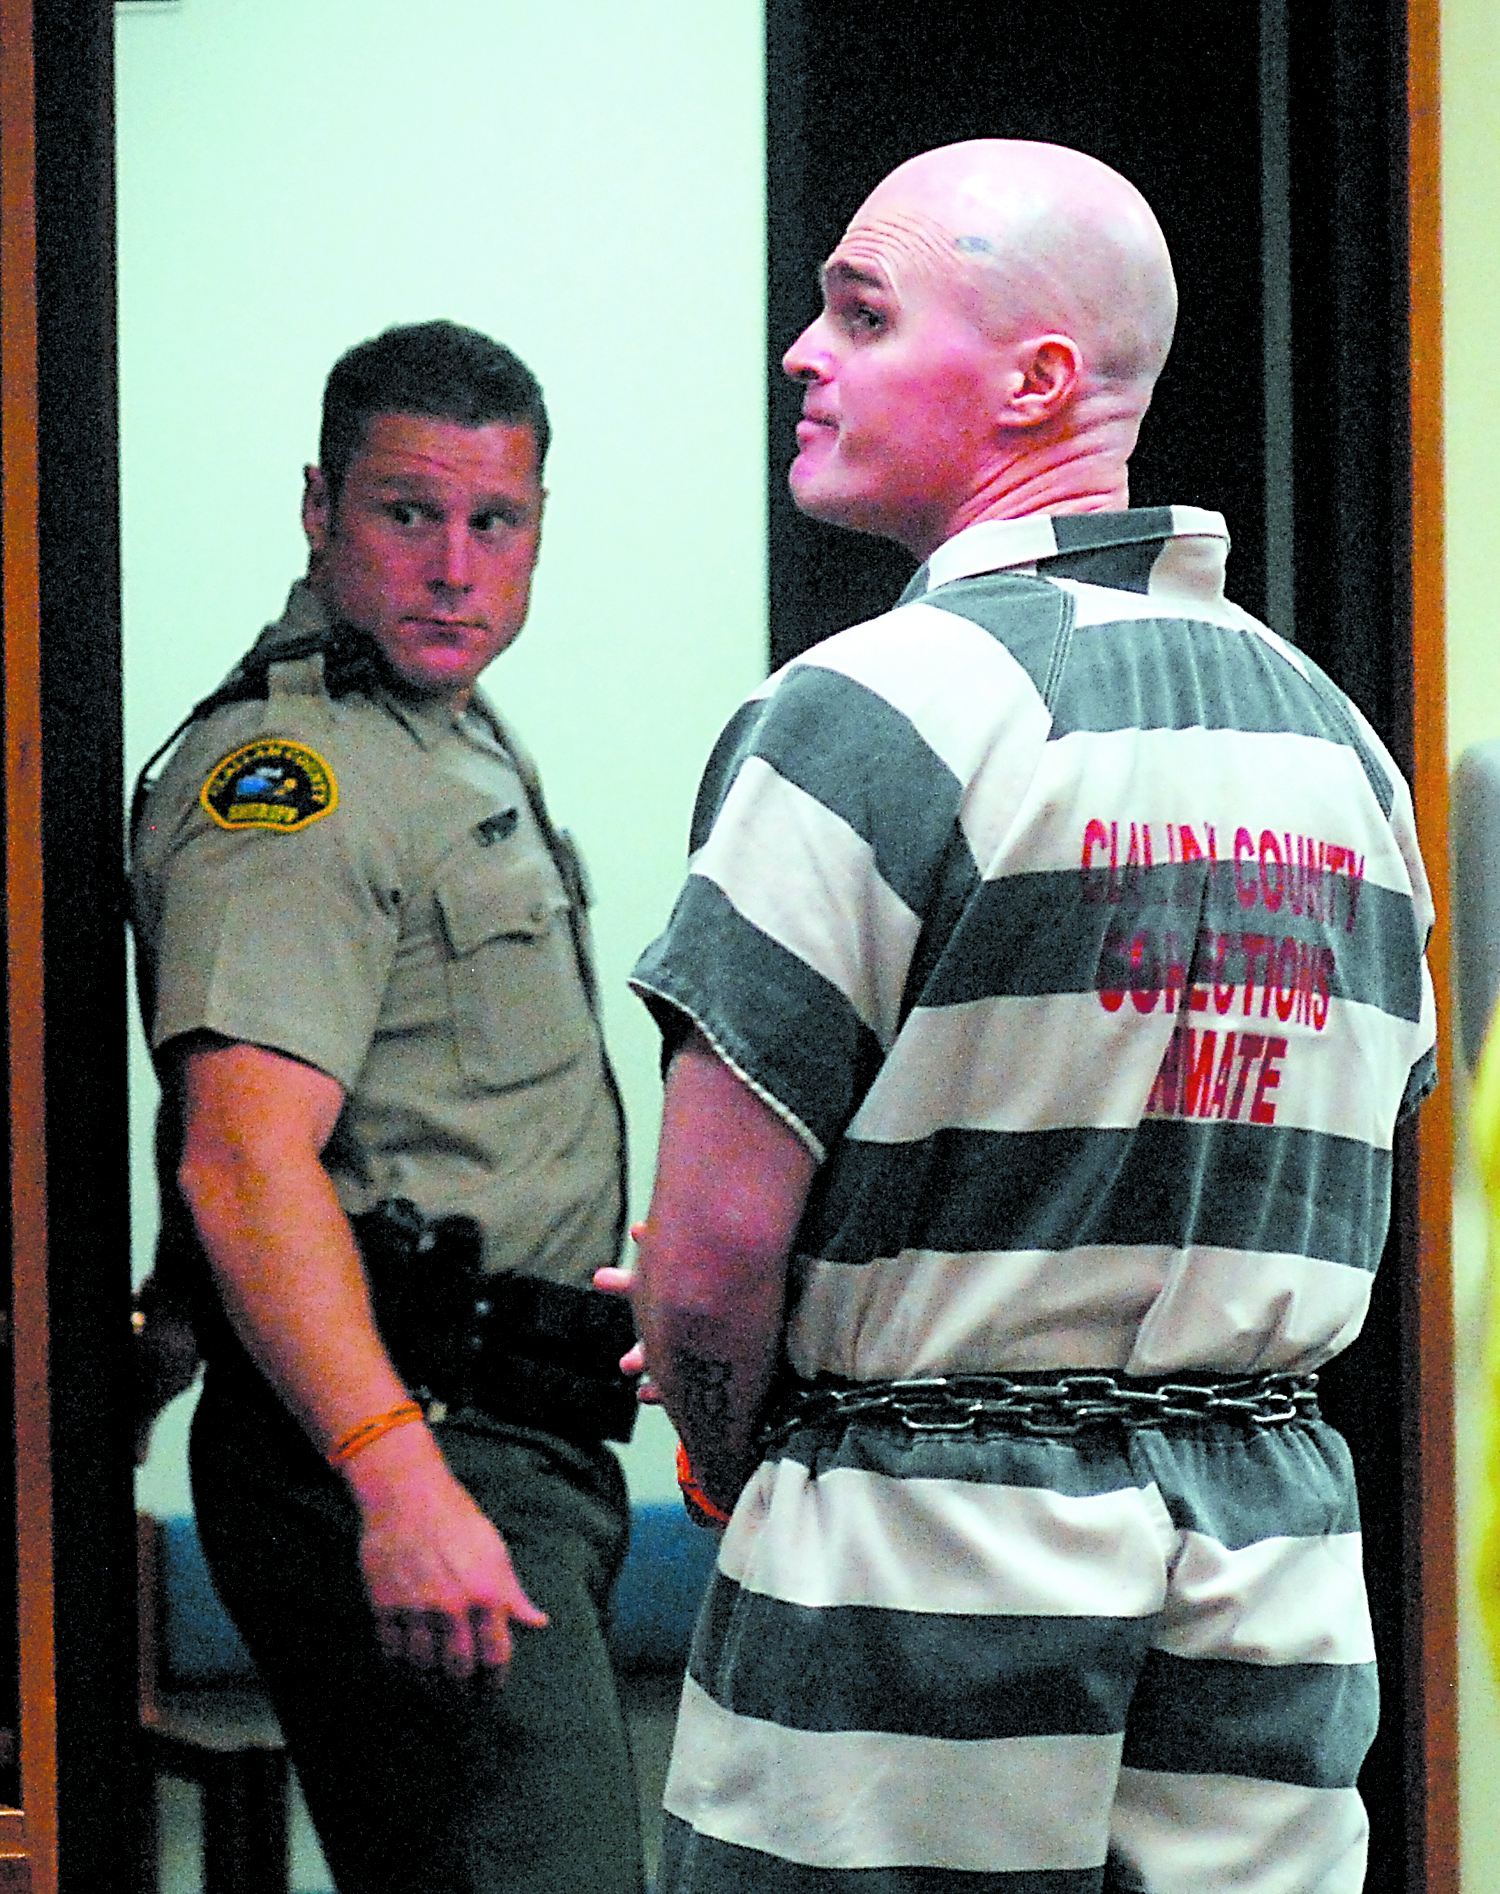 Patrick Drum looks back at the courtroom after his sentencing in Clallam County Superior Court in Port Angeles on Tuesday. Looking on at left is court security officer Eric Morris. Keith Thorpe/Peninsula Daily News